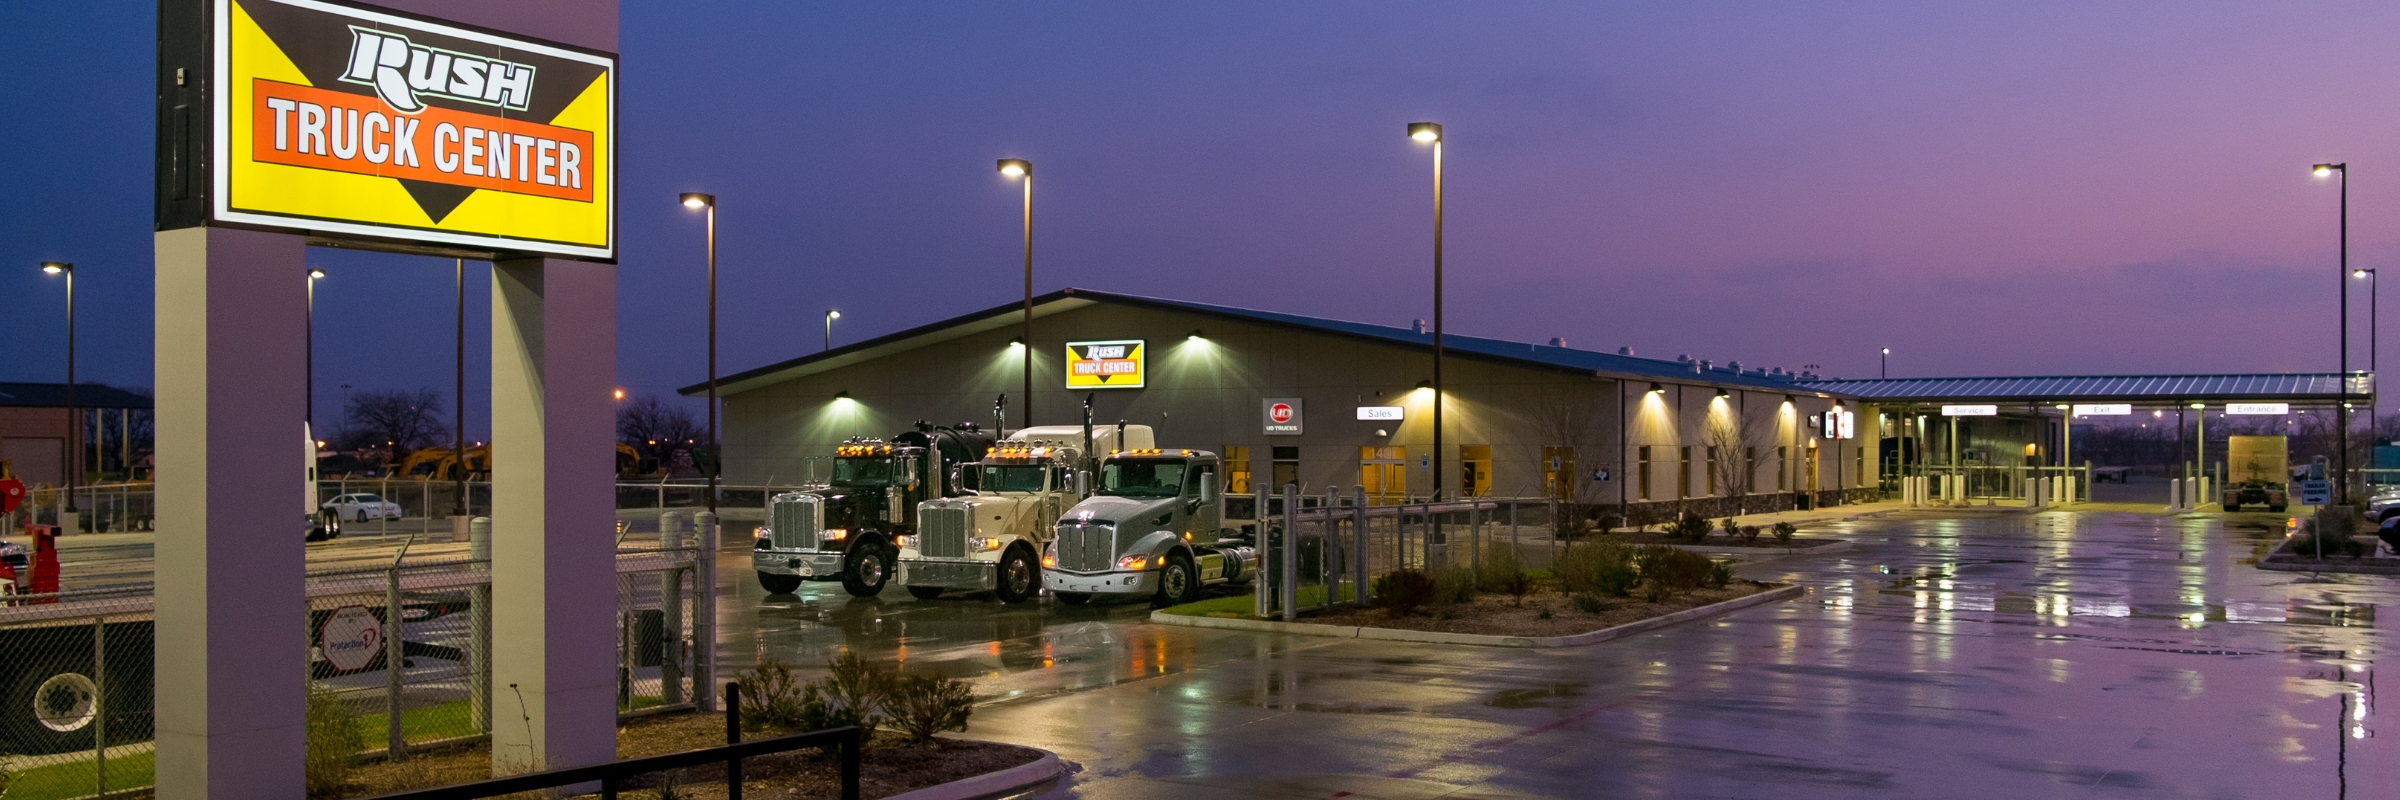 Rush Truck Centers – Fort Worth Exterior